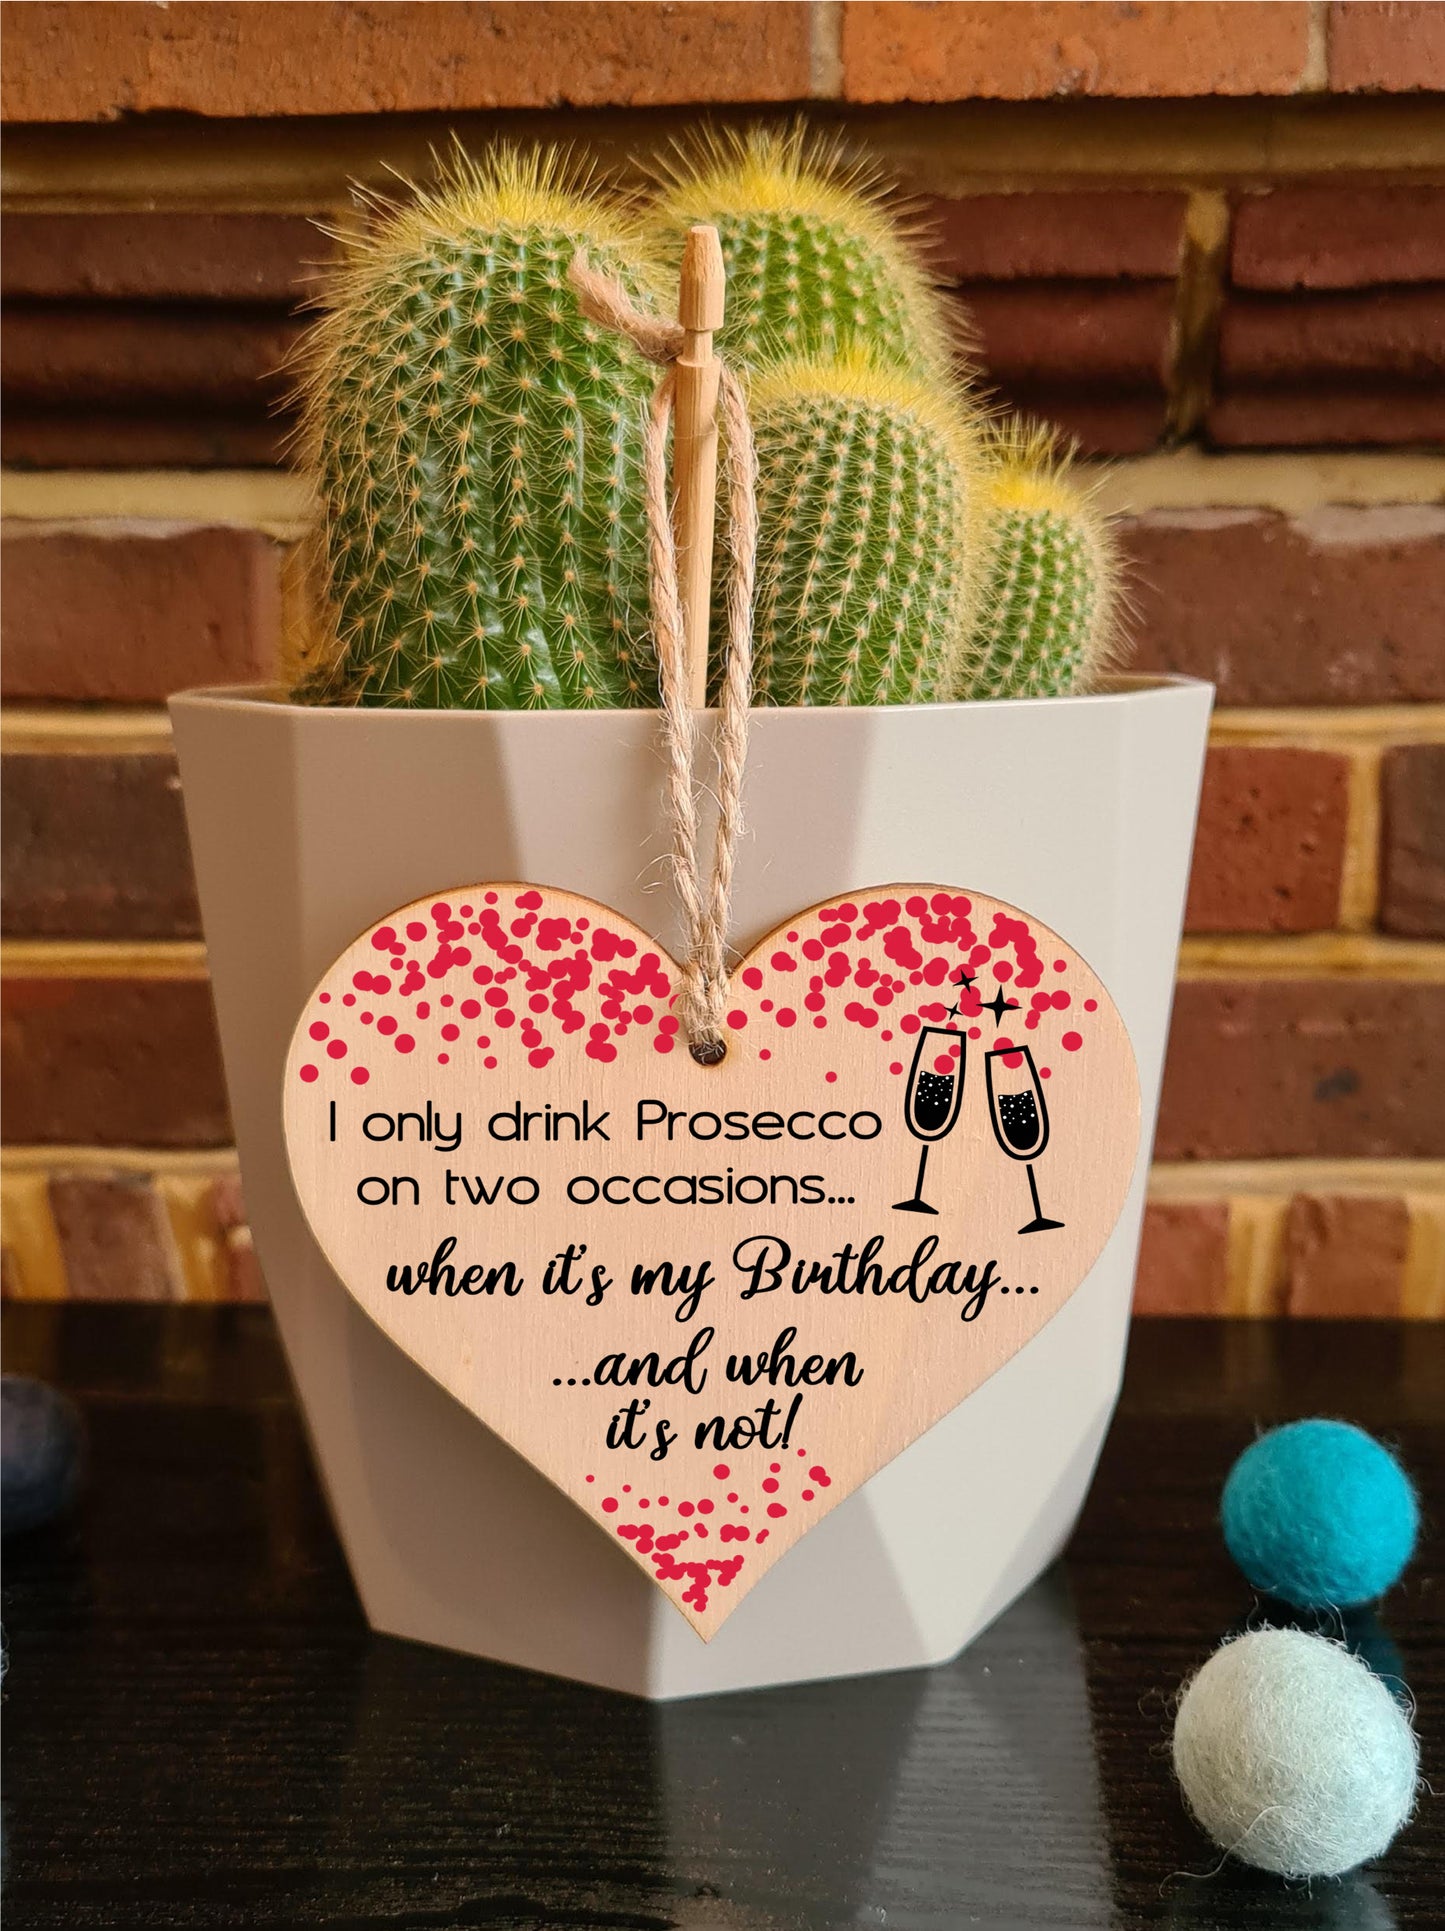 Handmade Wooden Hanging Heart Plaque Gift for Prosecco Lovers Novelty Funny Birthday Keepsake